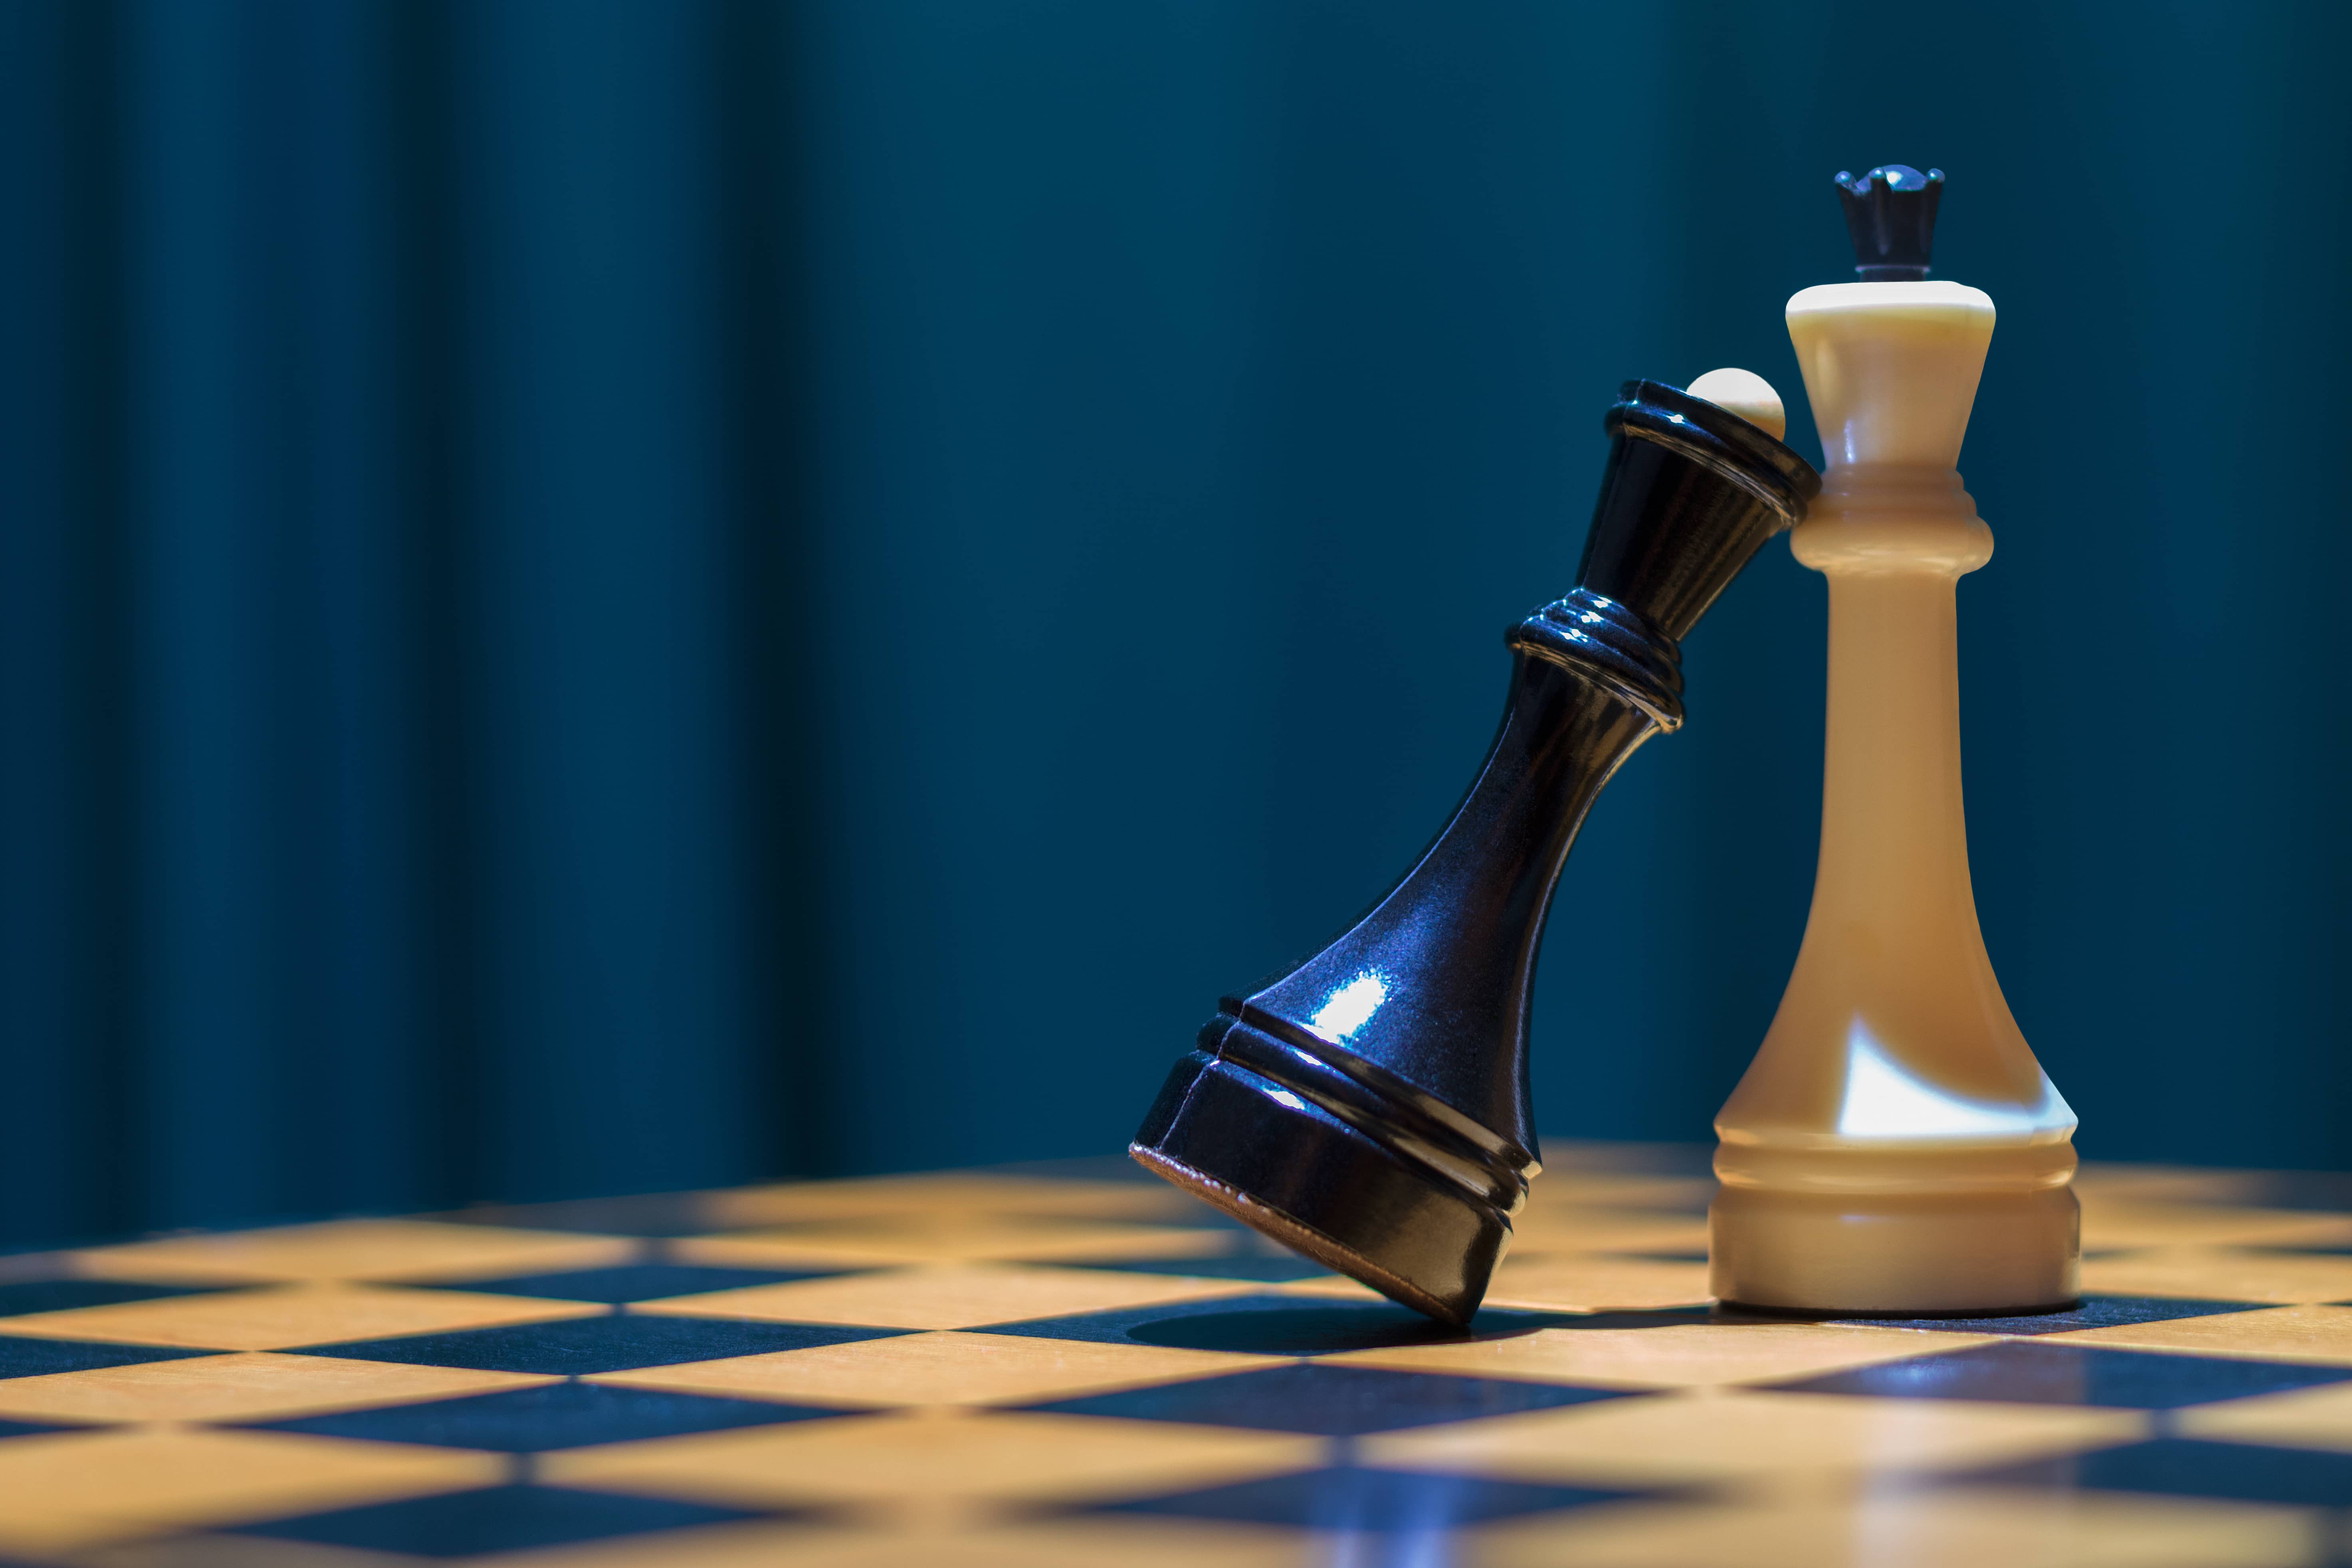 To Be A Successful Business Leader, Think Like A Chess Player